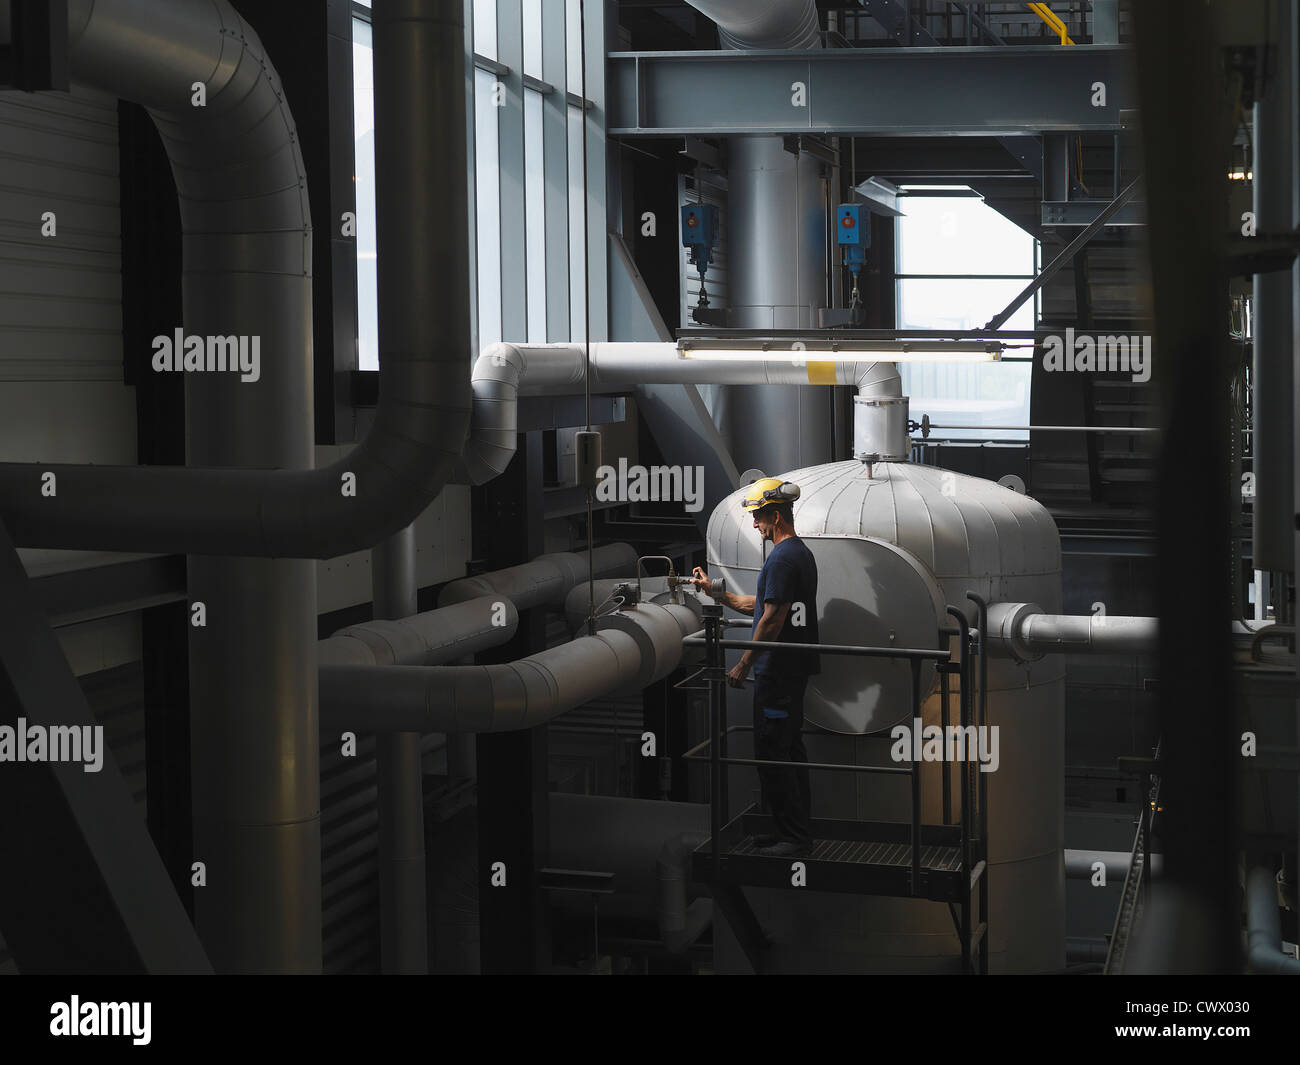 Worker operating machinery in factory Stock Photo